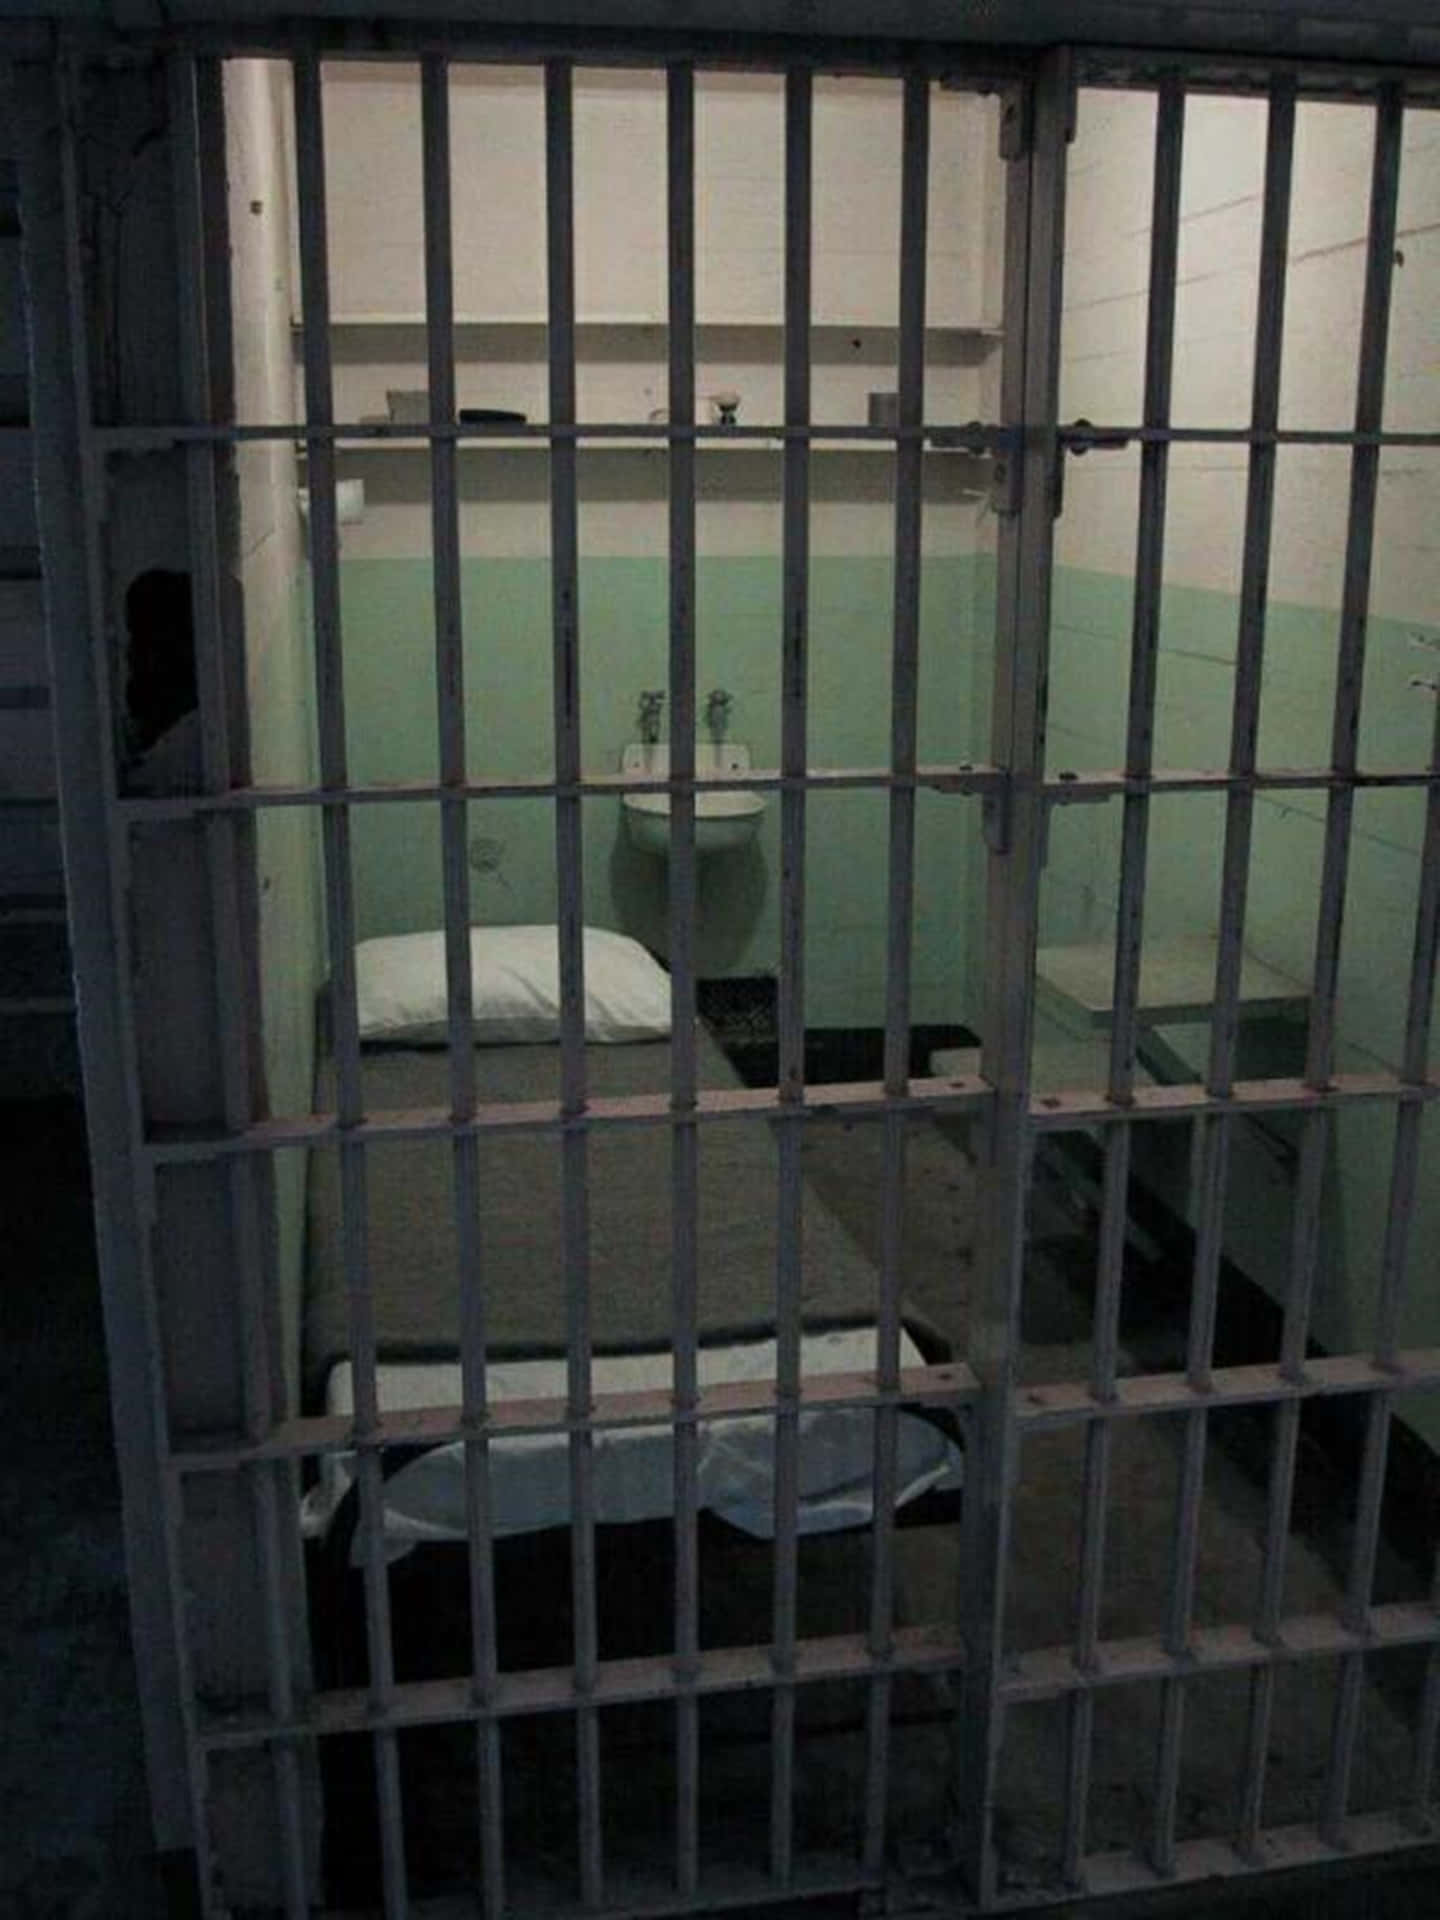 A Look Inside a Jail Cell